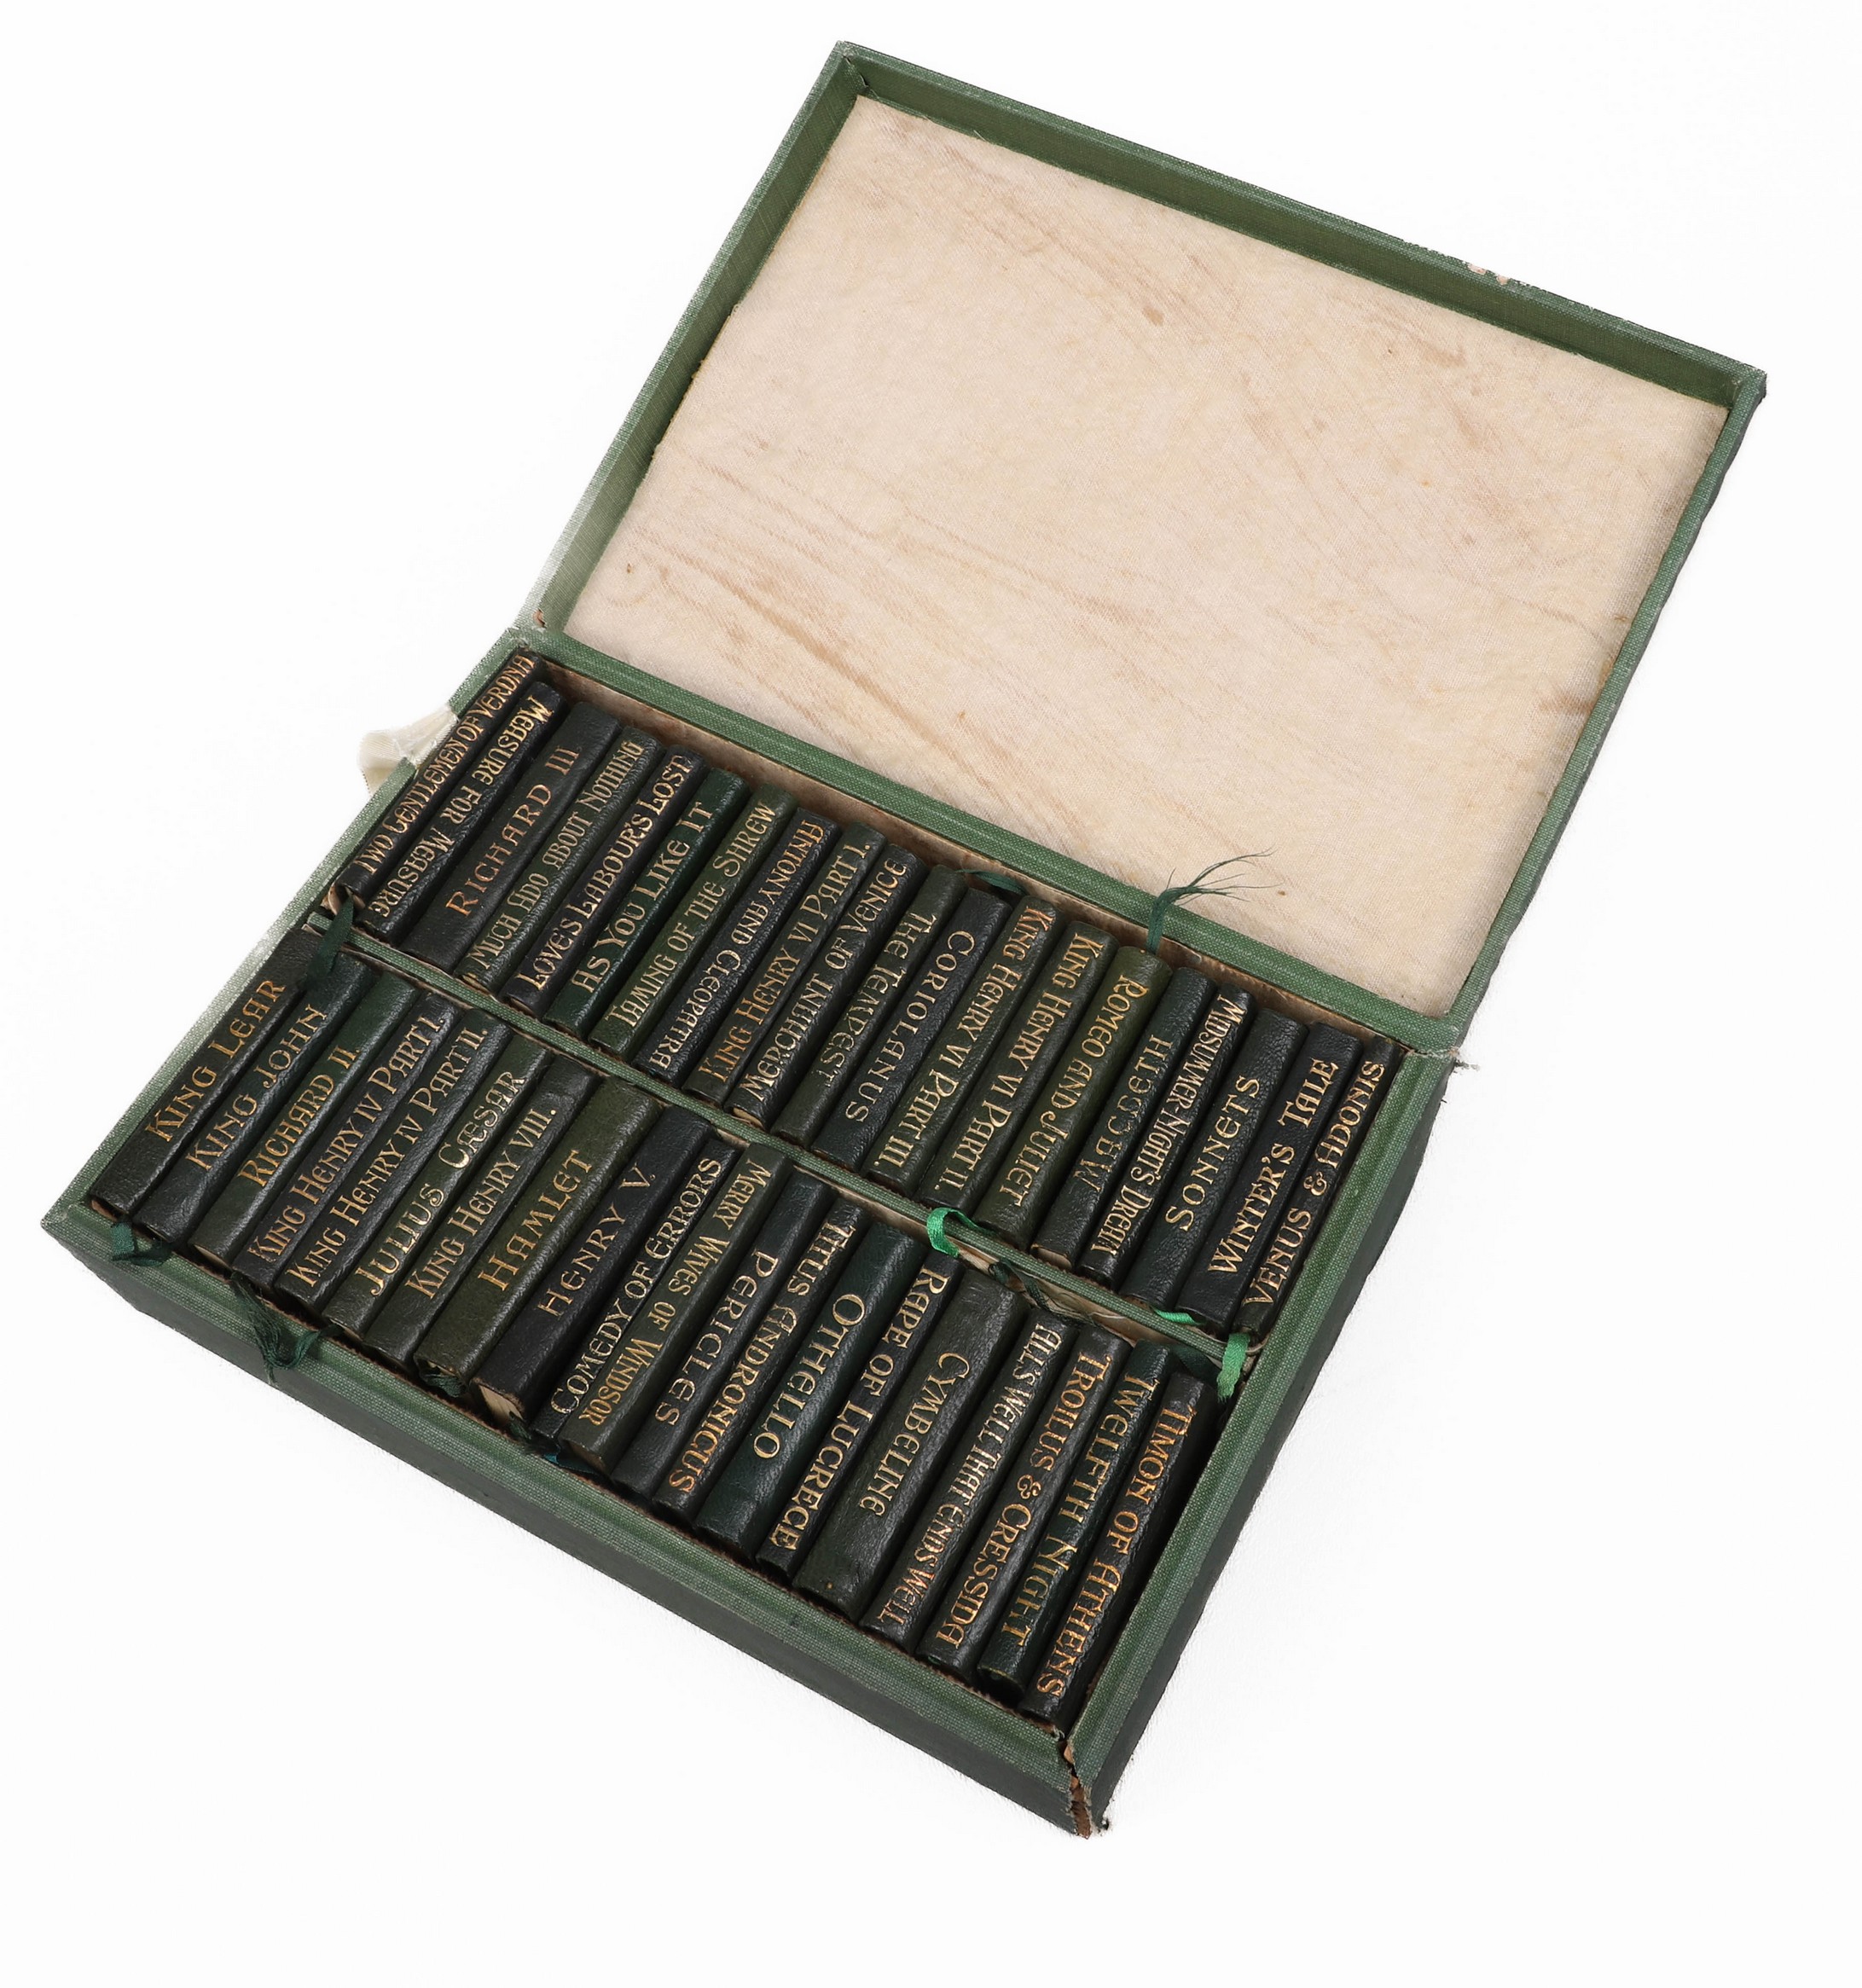 A forty volume miniature set of 27a61d